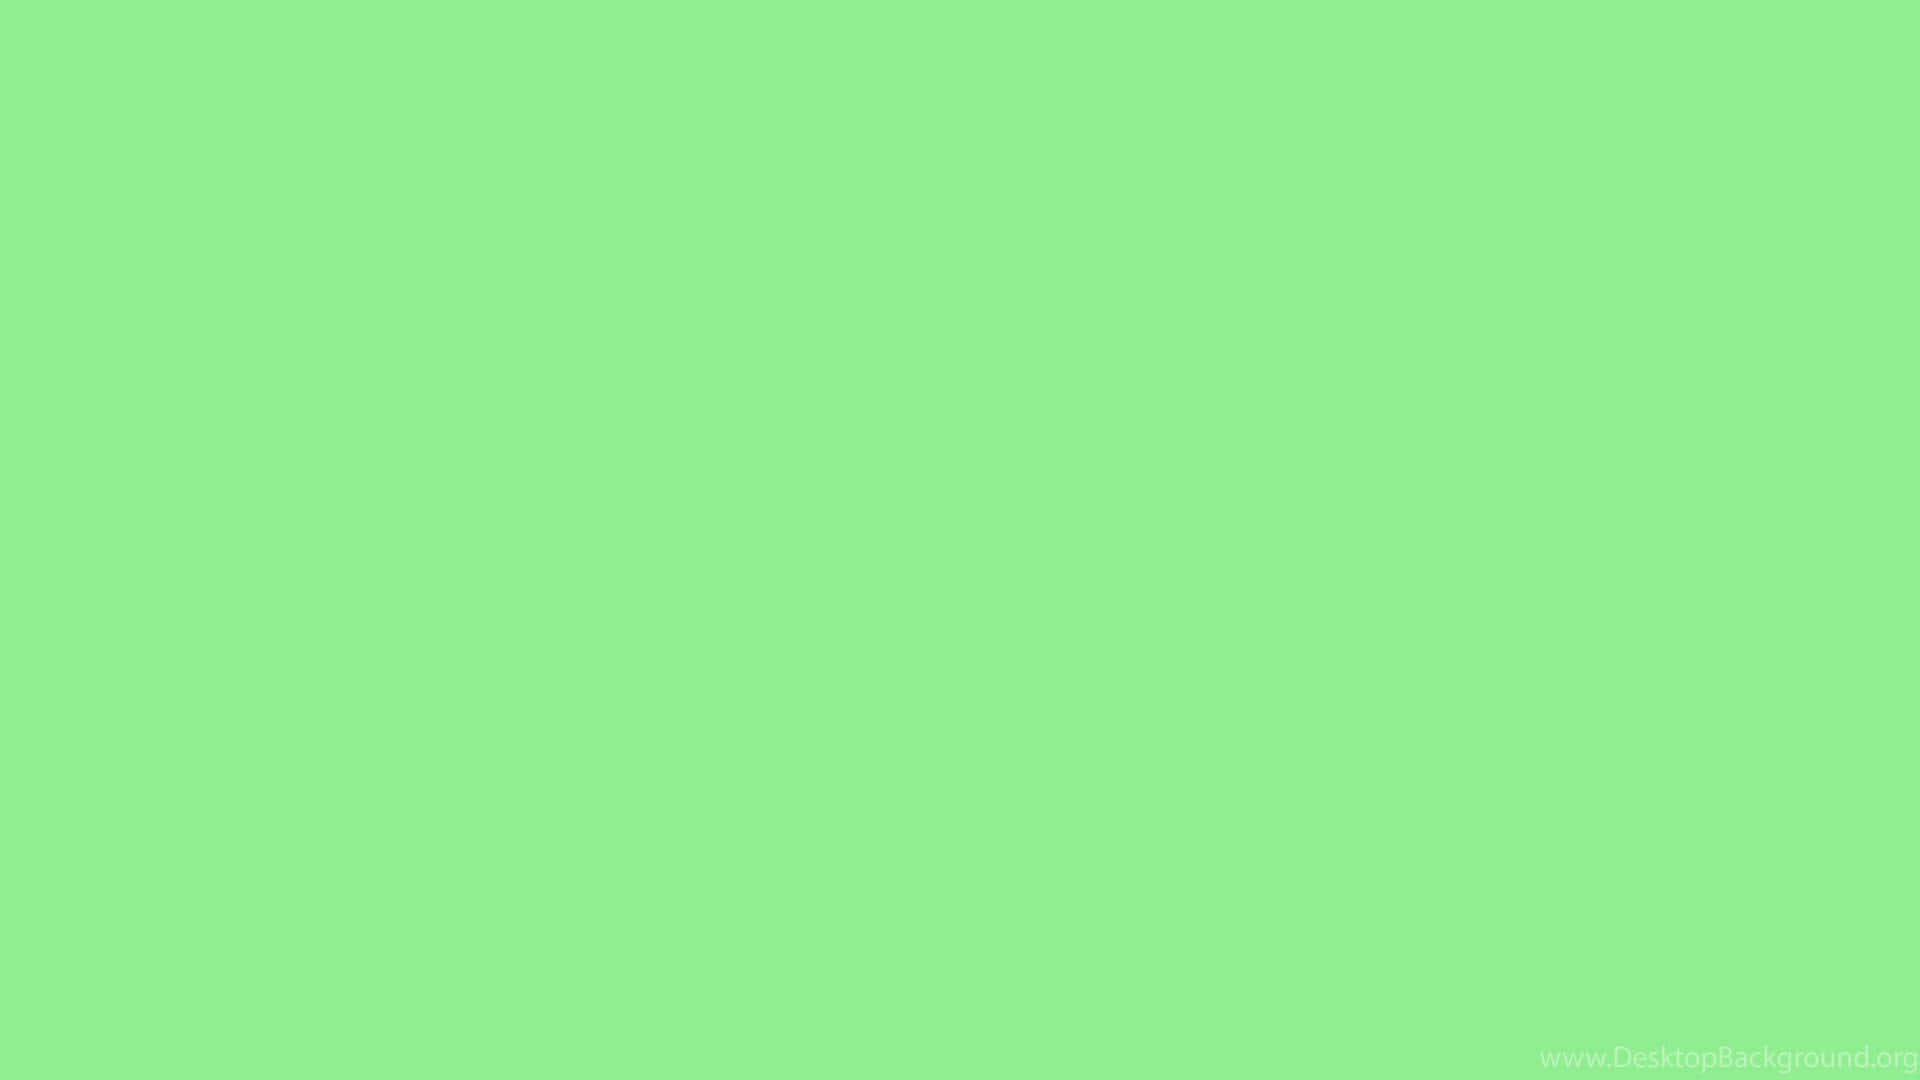 Serenity In Simplicity: A Plain Green Background